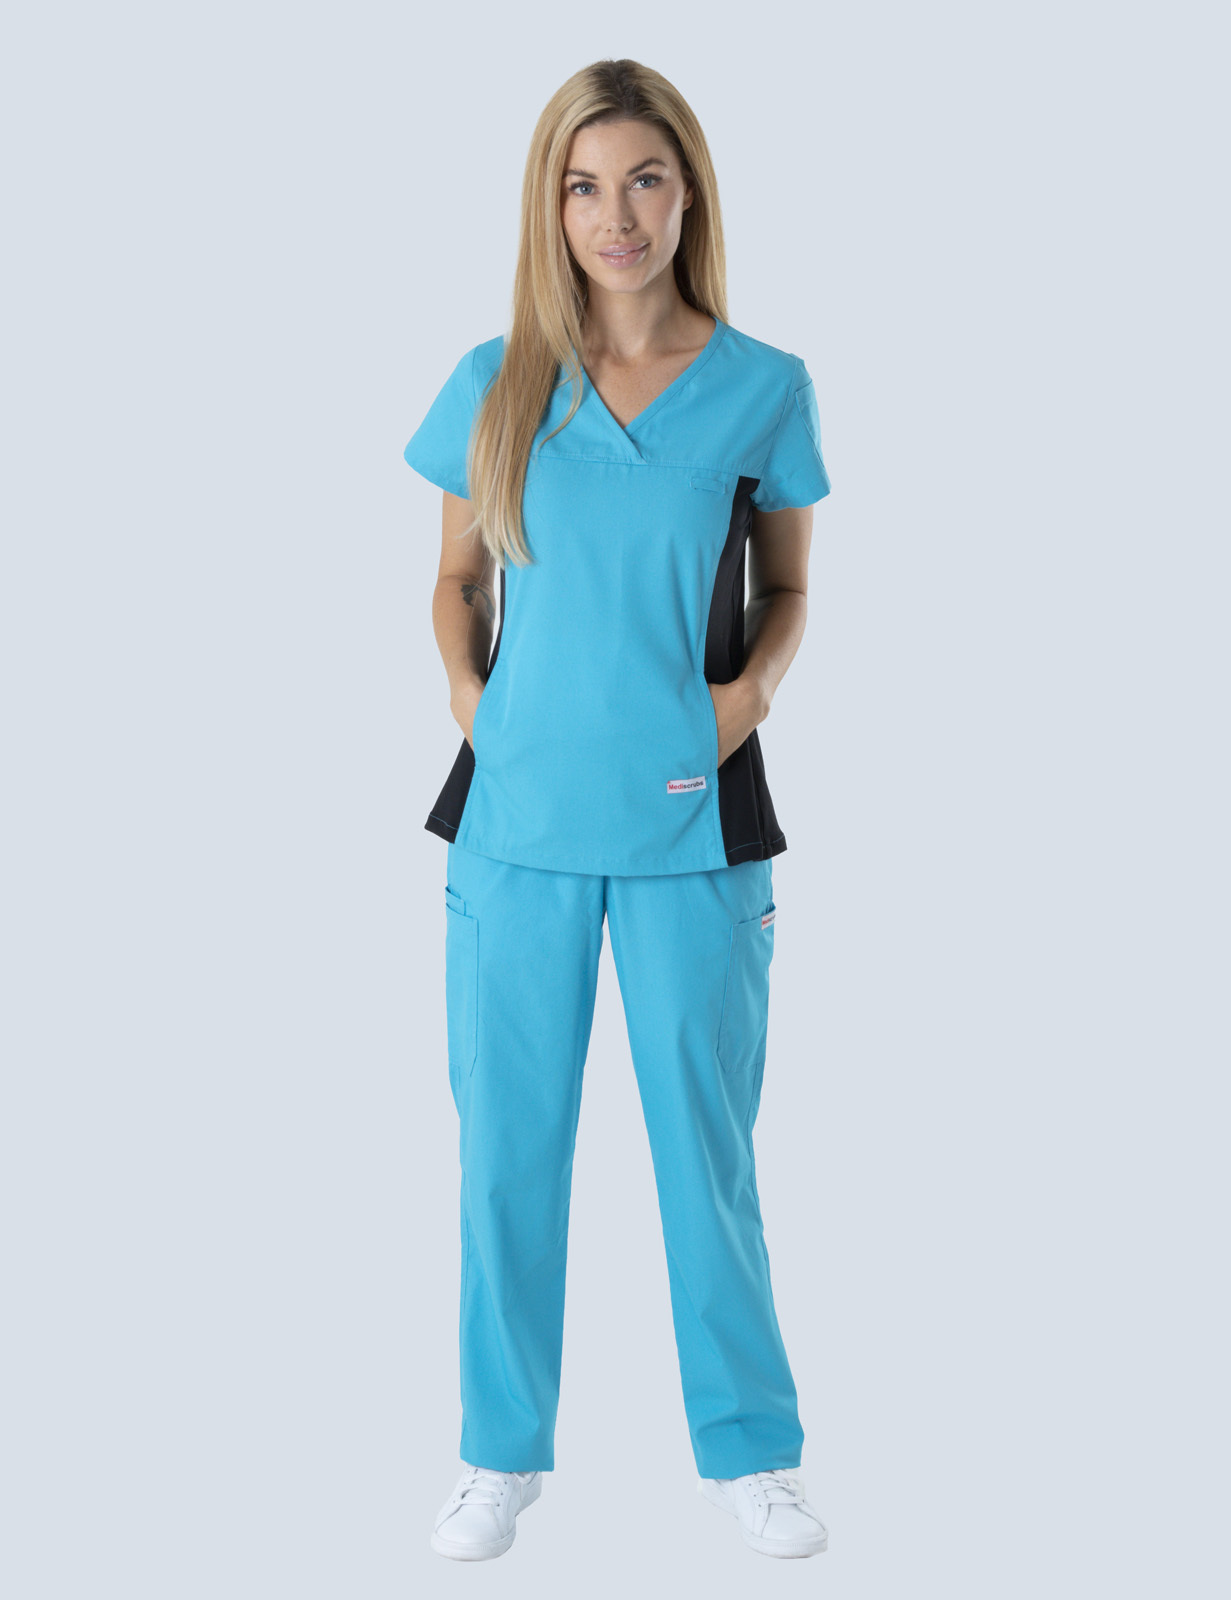 Women's Fit Solid Scrub Top With Spandex Panel - Aqua - X Small